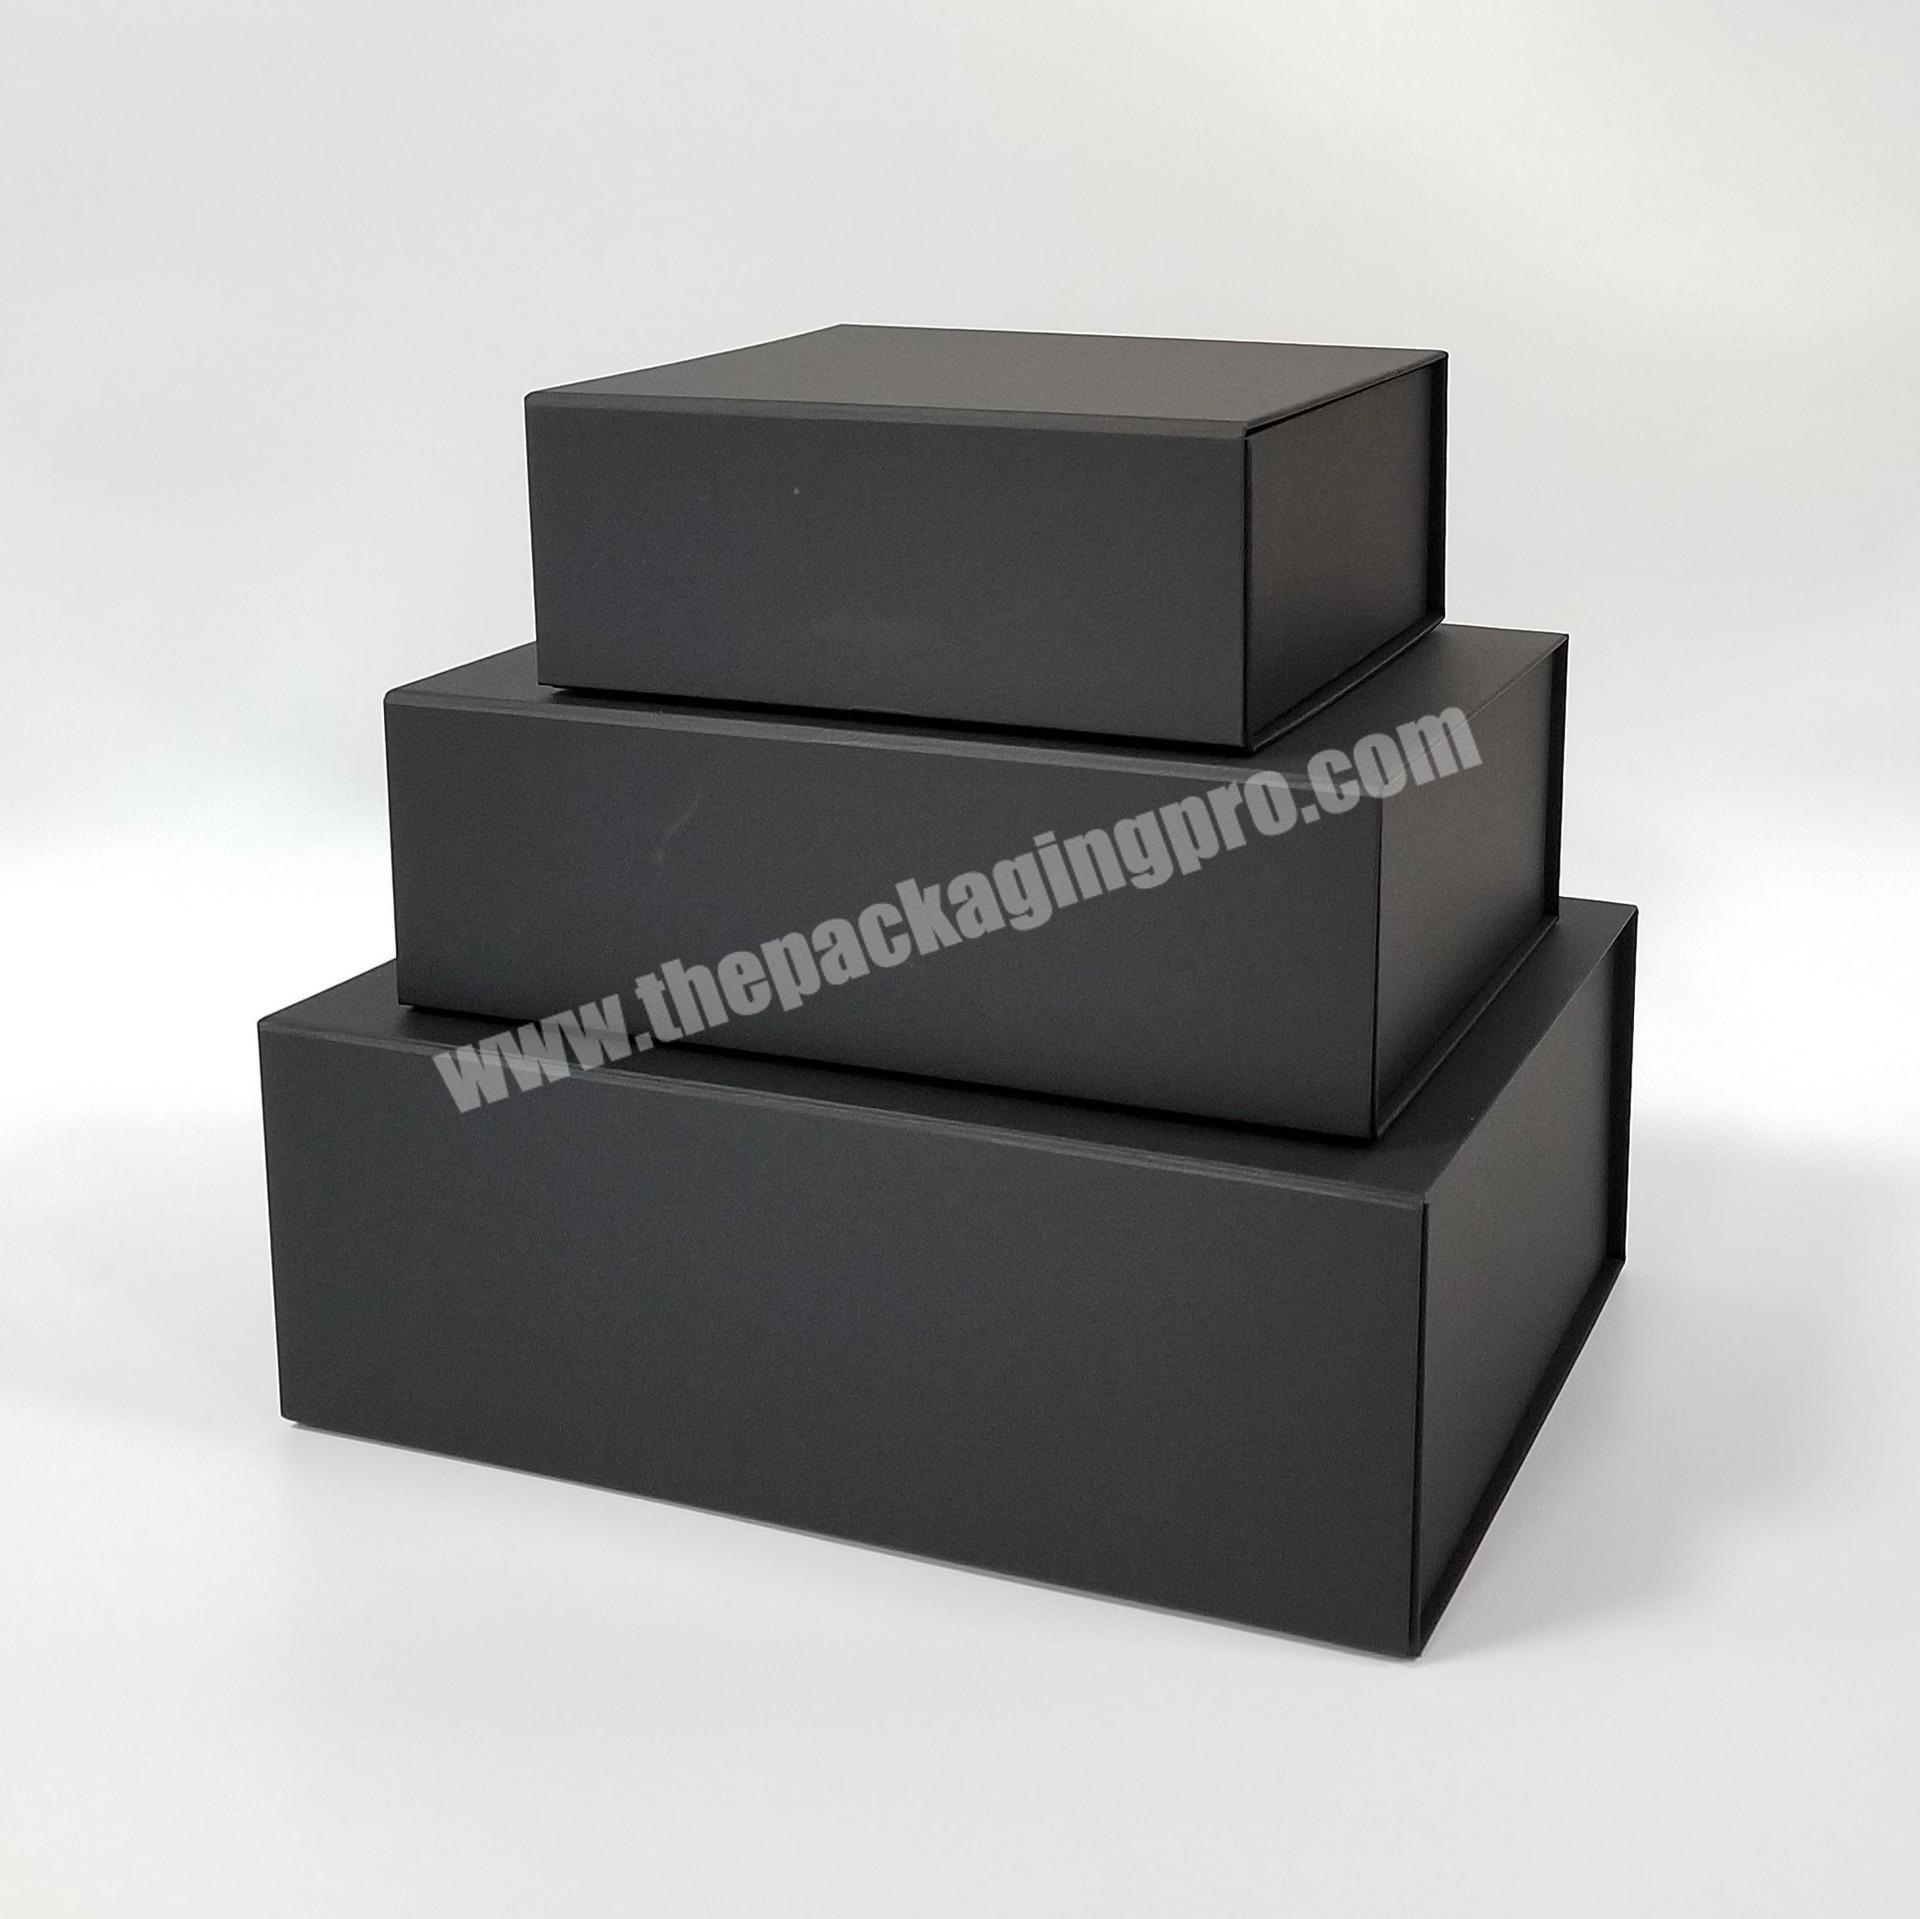 Dongming custom design decorative gift large paper packaging box magnetic flap to close the box